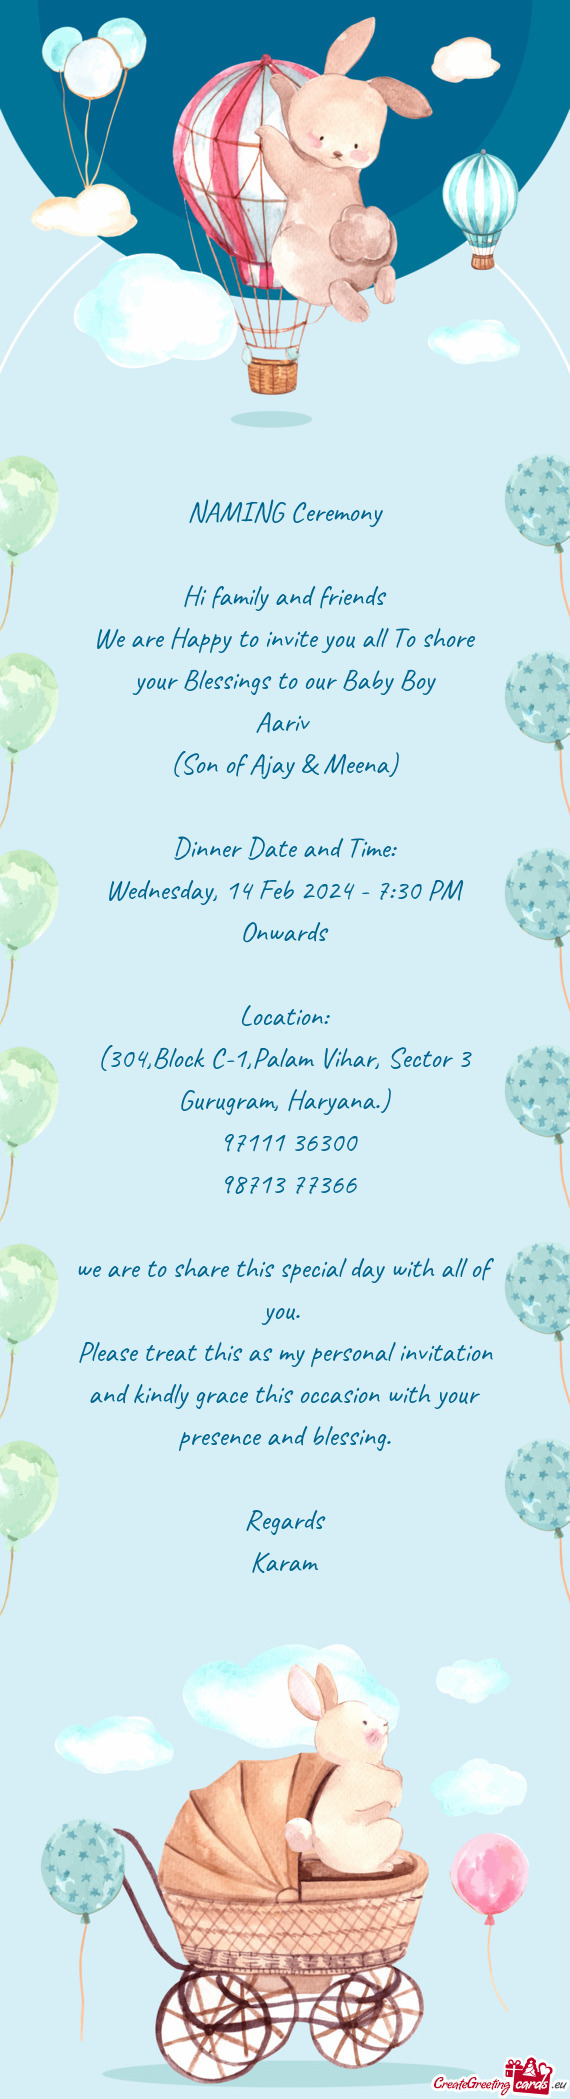 We are Happy to invite you all To shore your Blessings to our Baby Boy